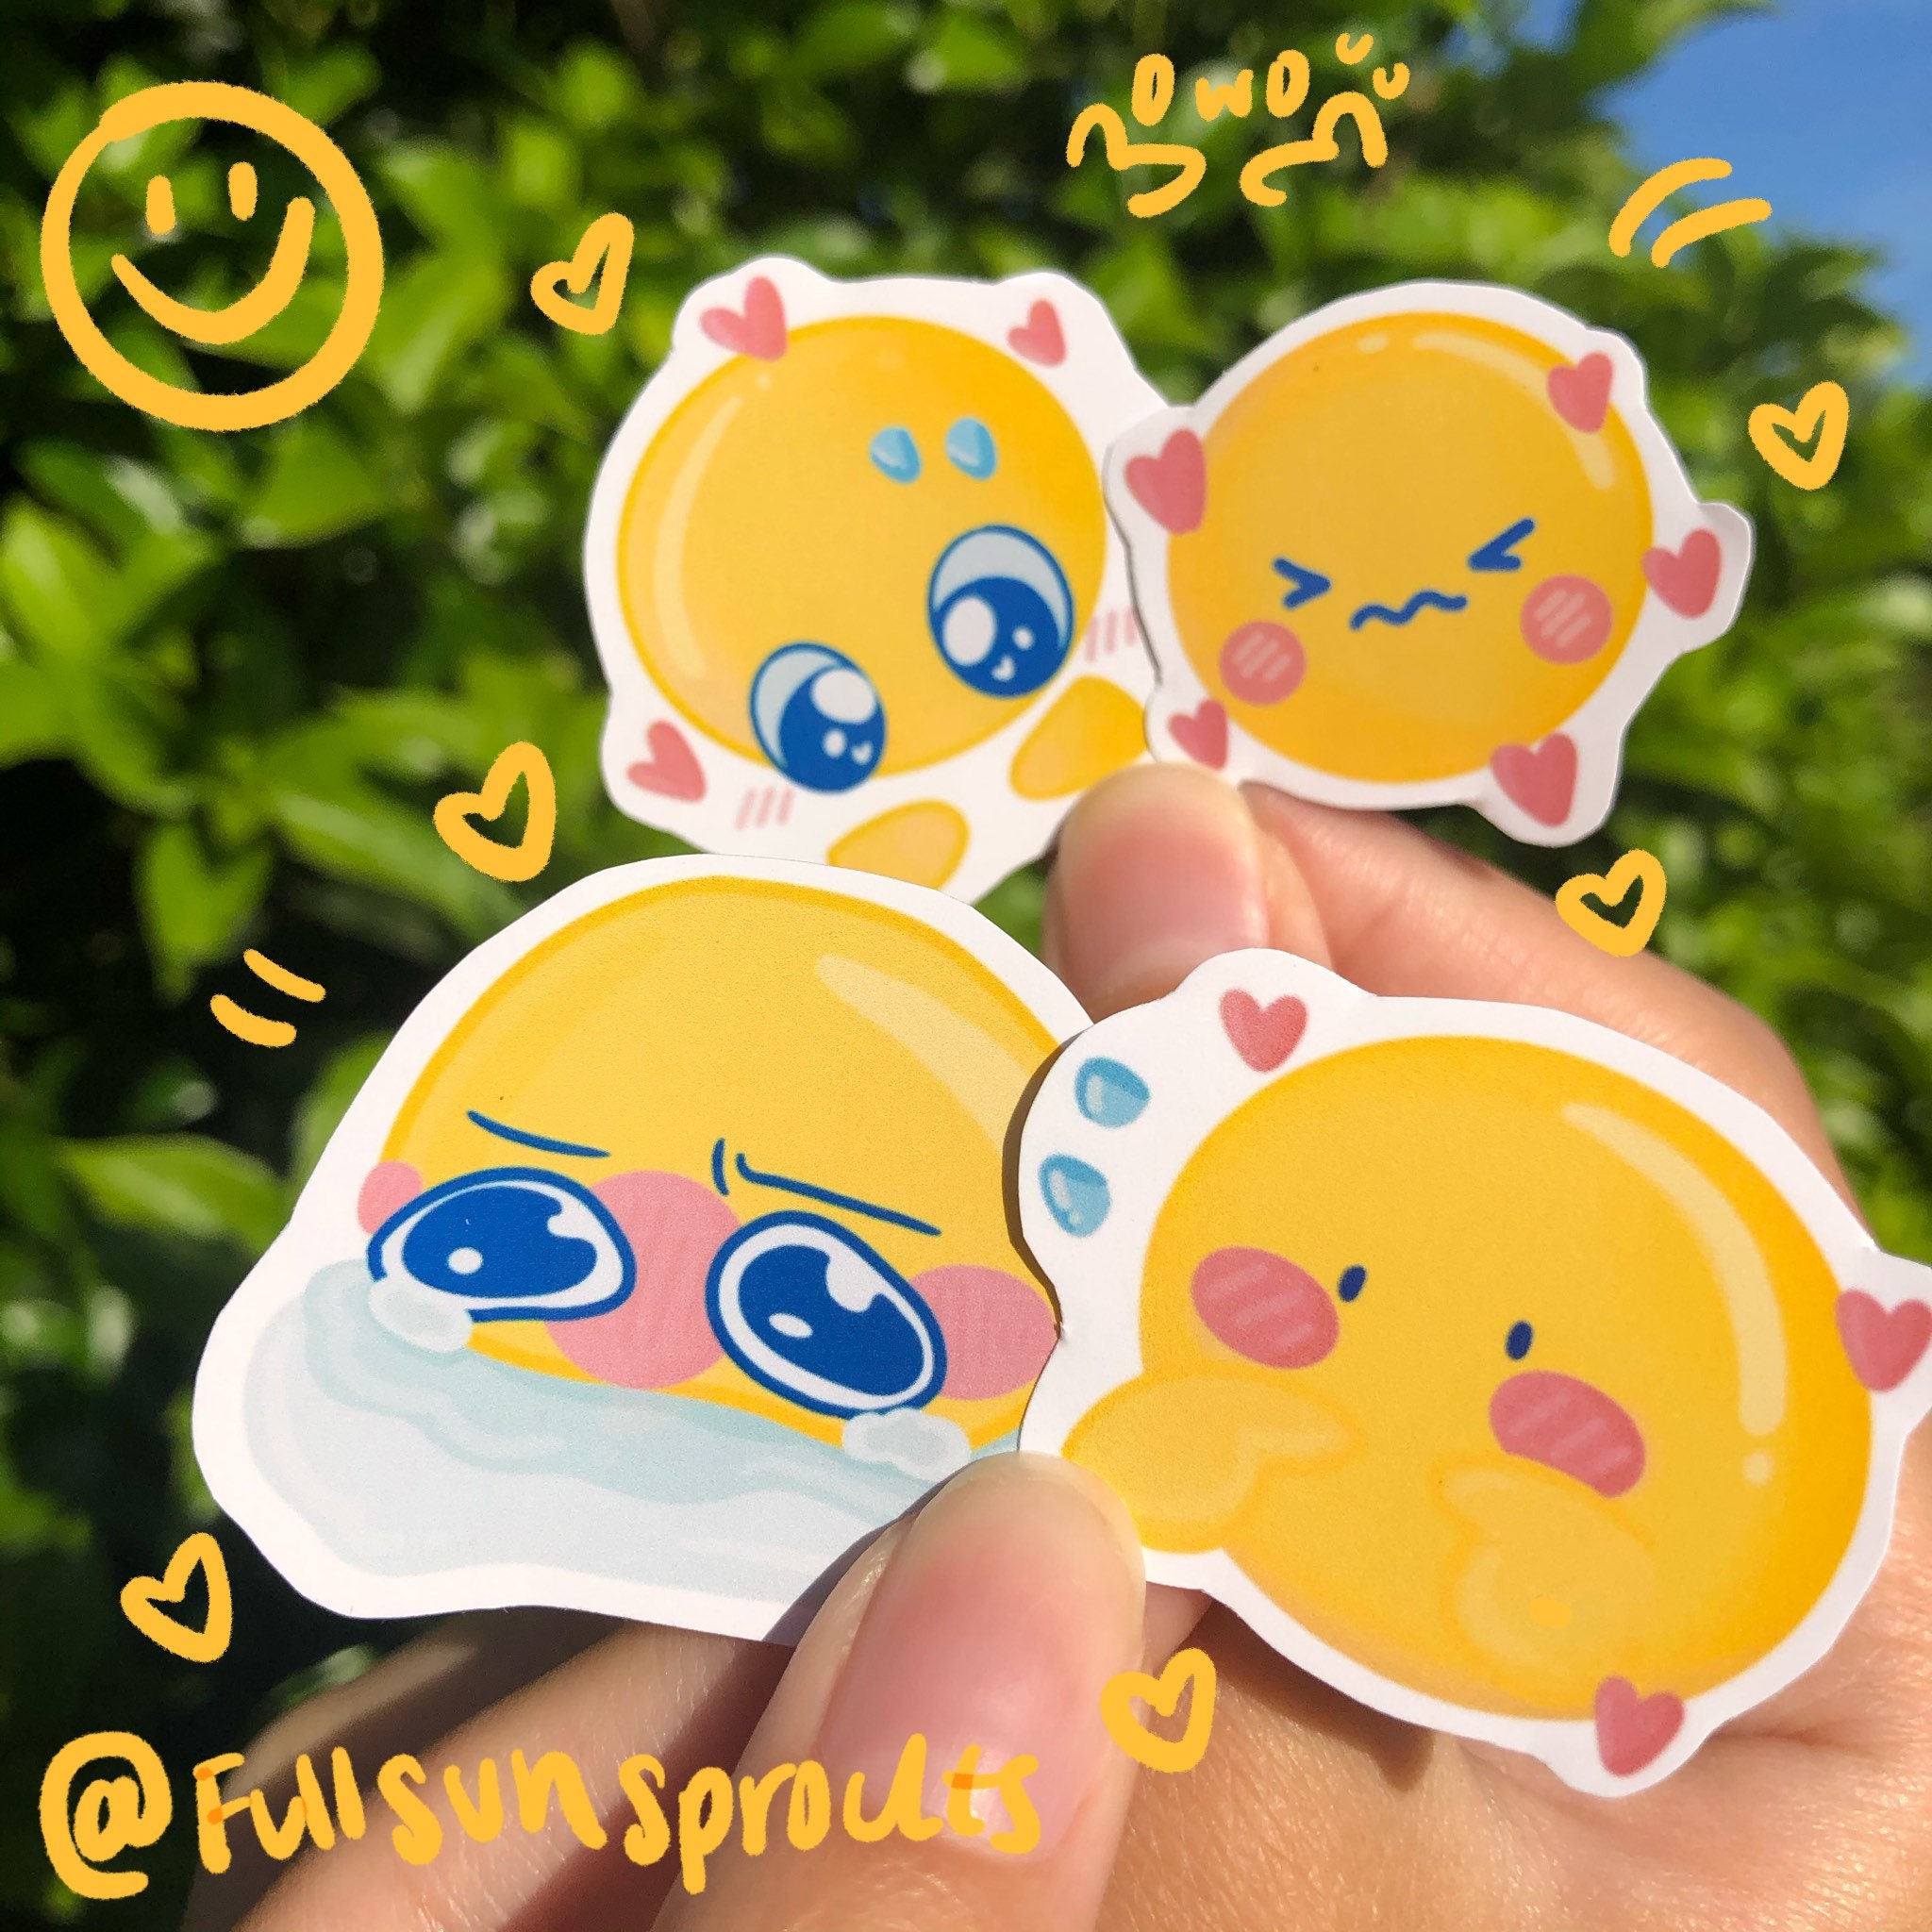 give you all my love - adorable cursed emoji Sticker for Sale by Blue  Pencil